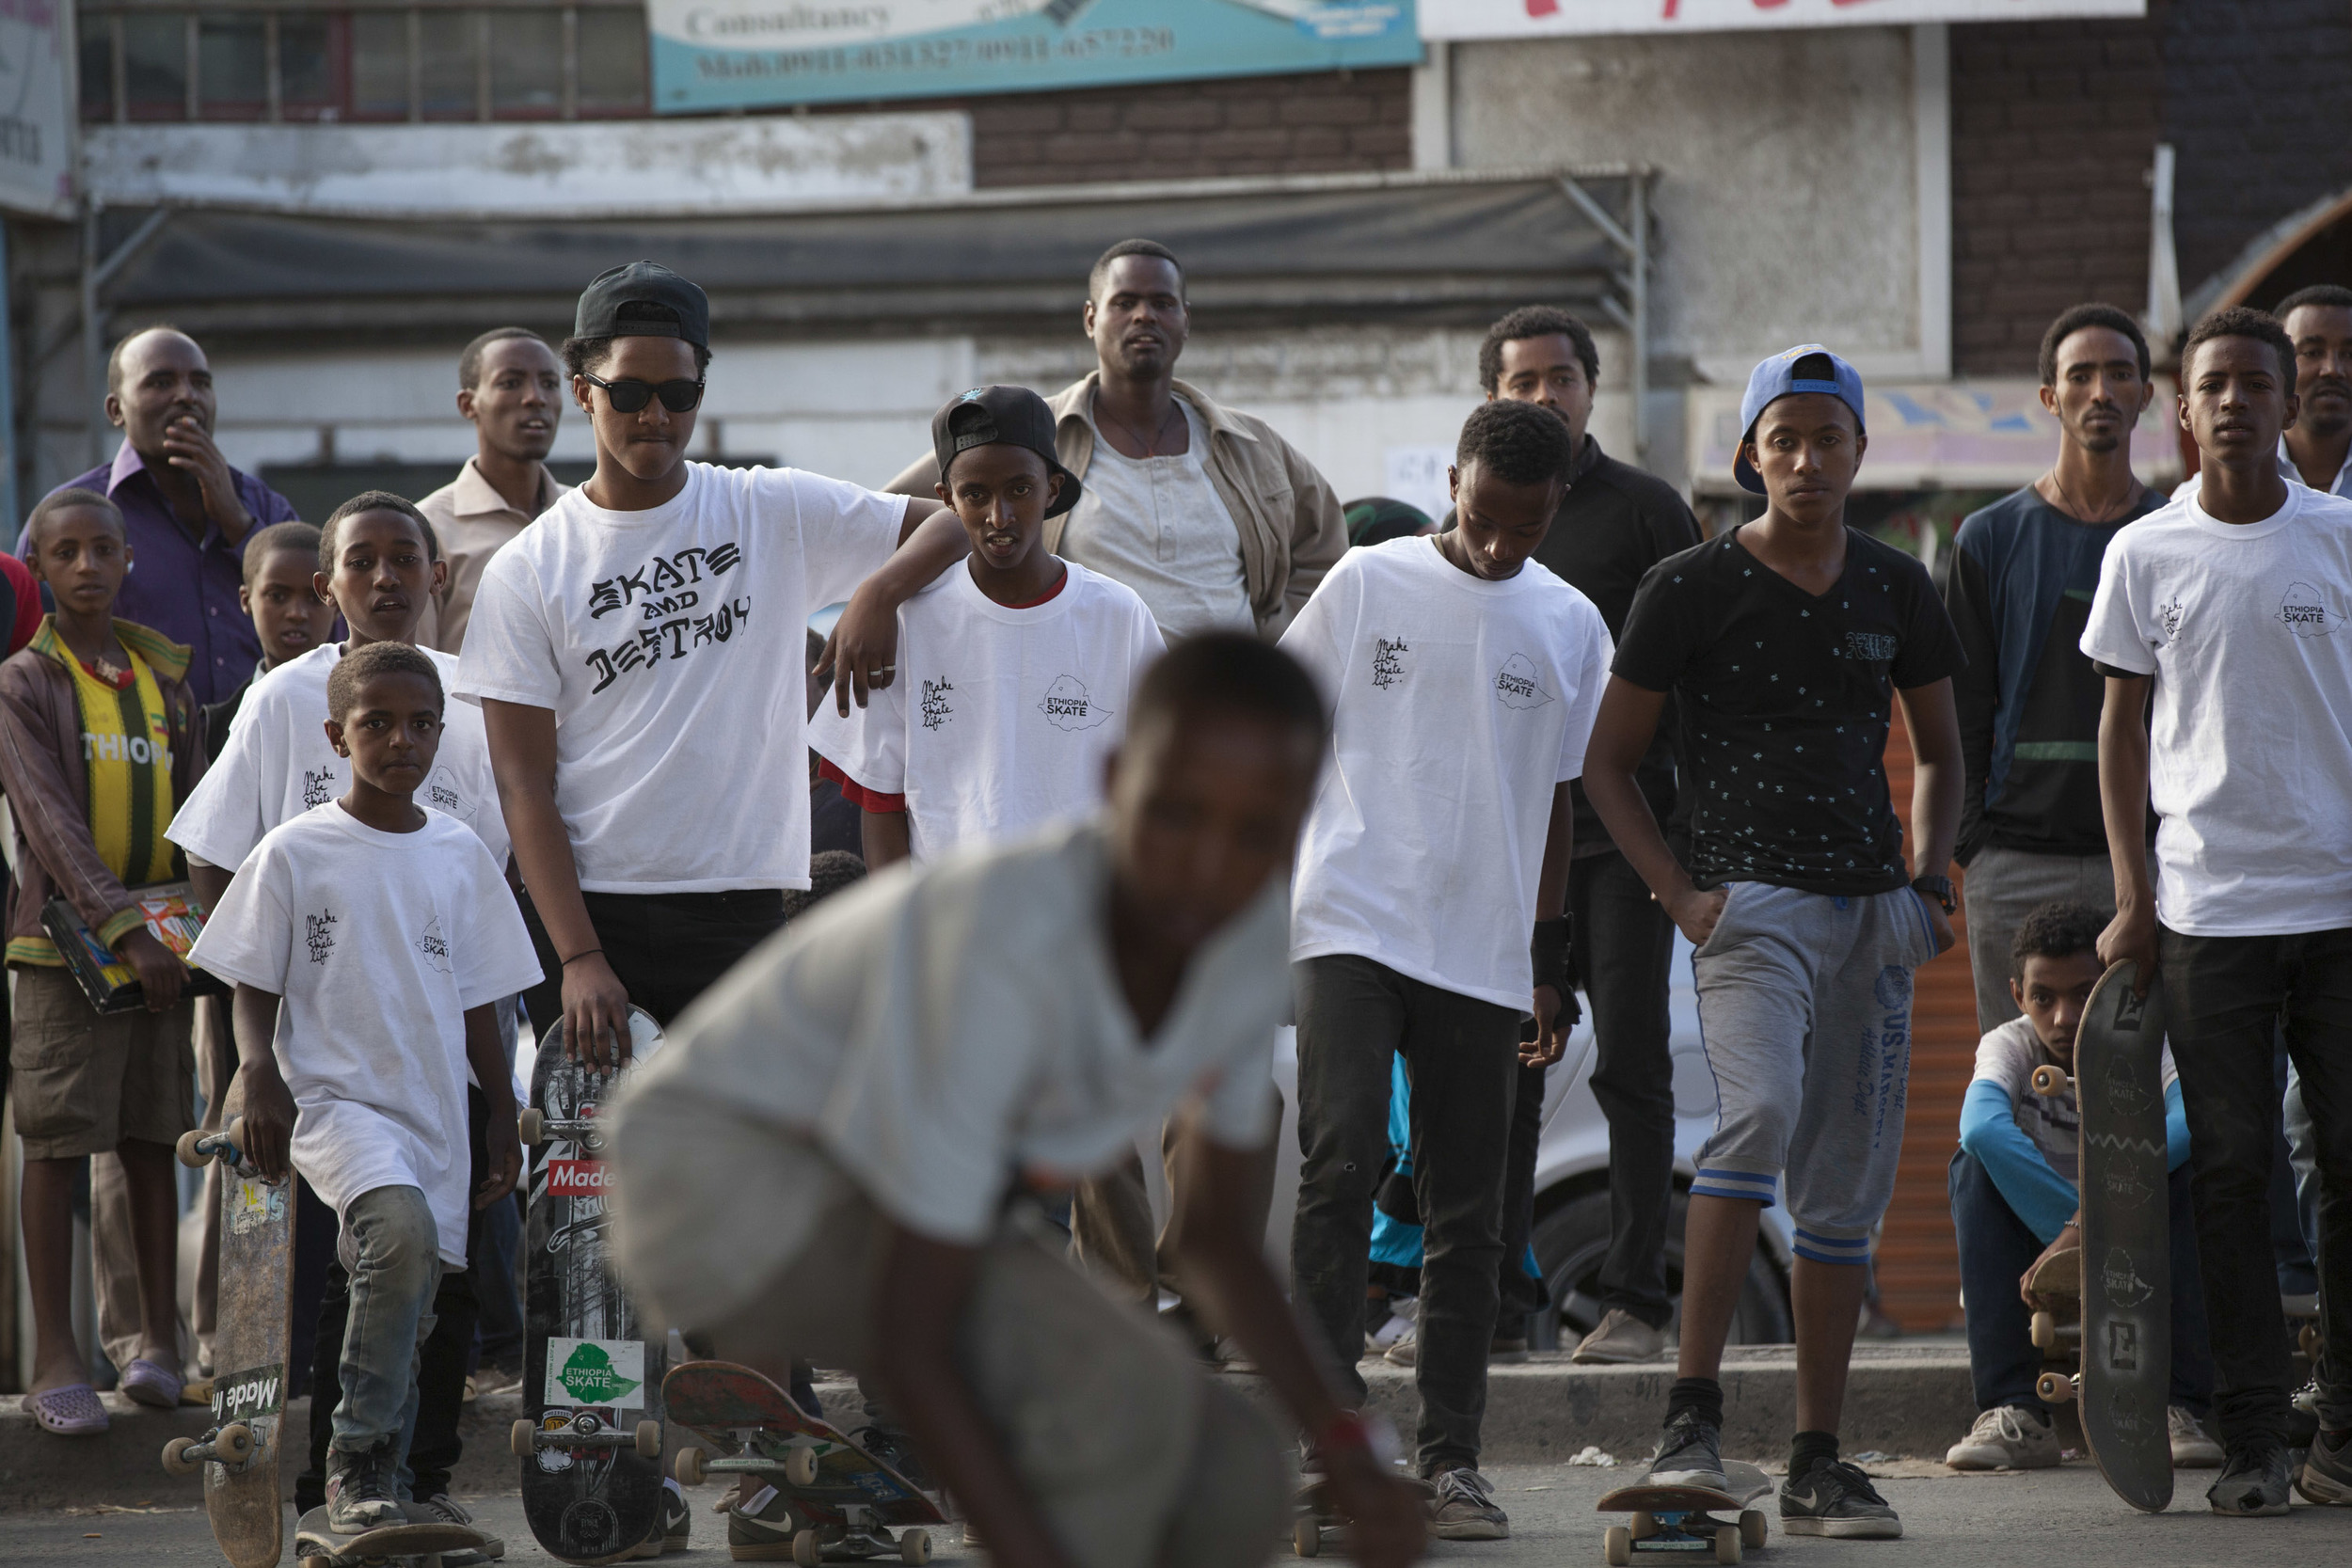  An young Ethiopian skateboarder, part of the Ethiopia Skate organization, is pictured mid-trick in the Bole area of Addis Ababa as his fellow skater friends watch on 2 March 2015. There is a growing skateboarding movement happening in Ethiopia, bein